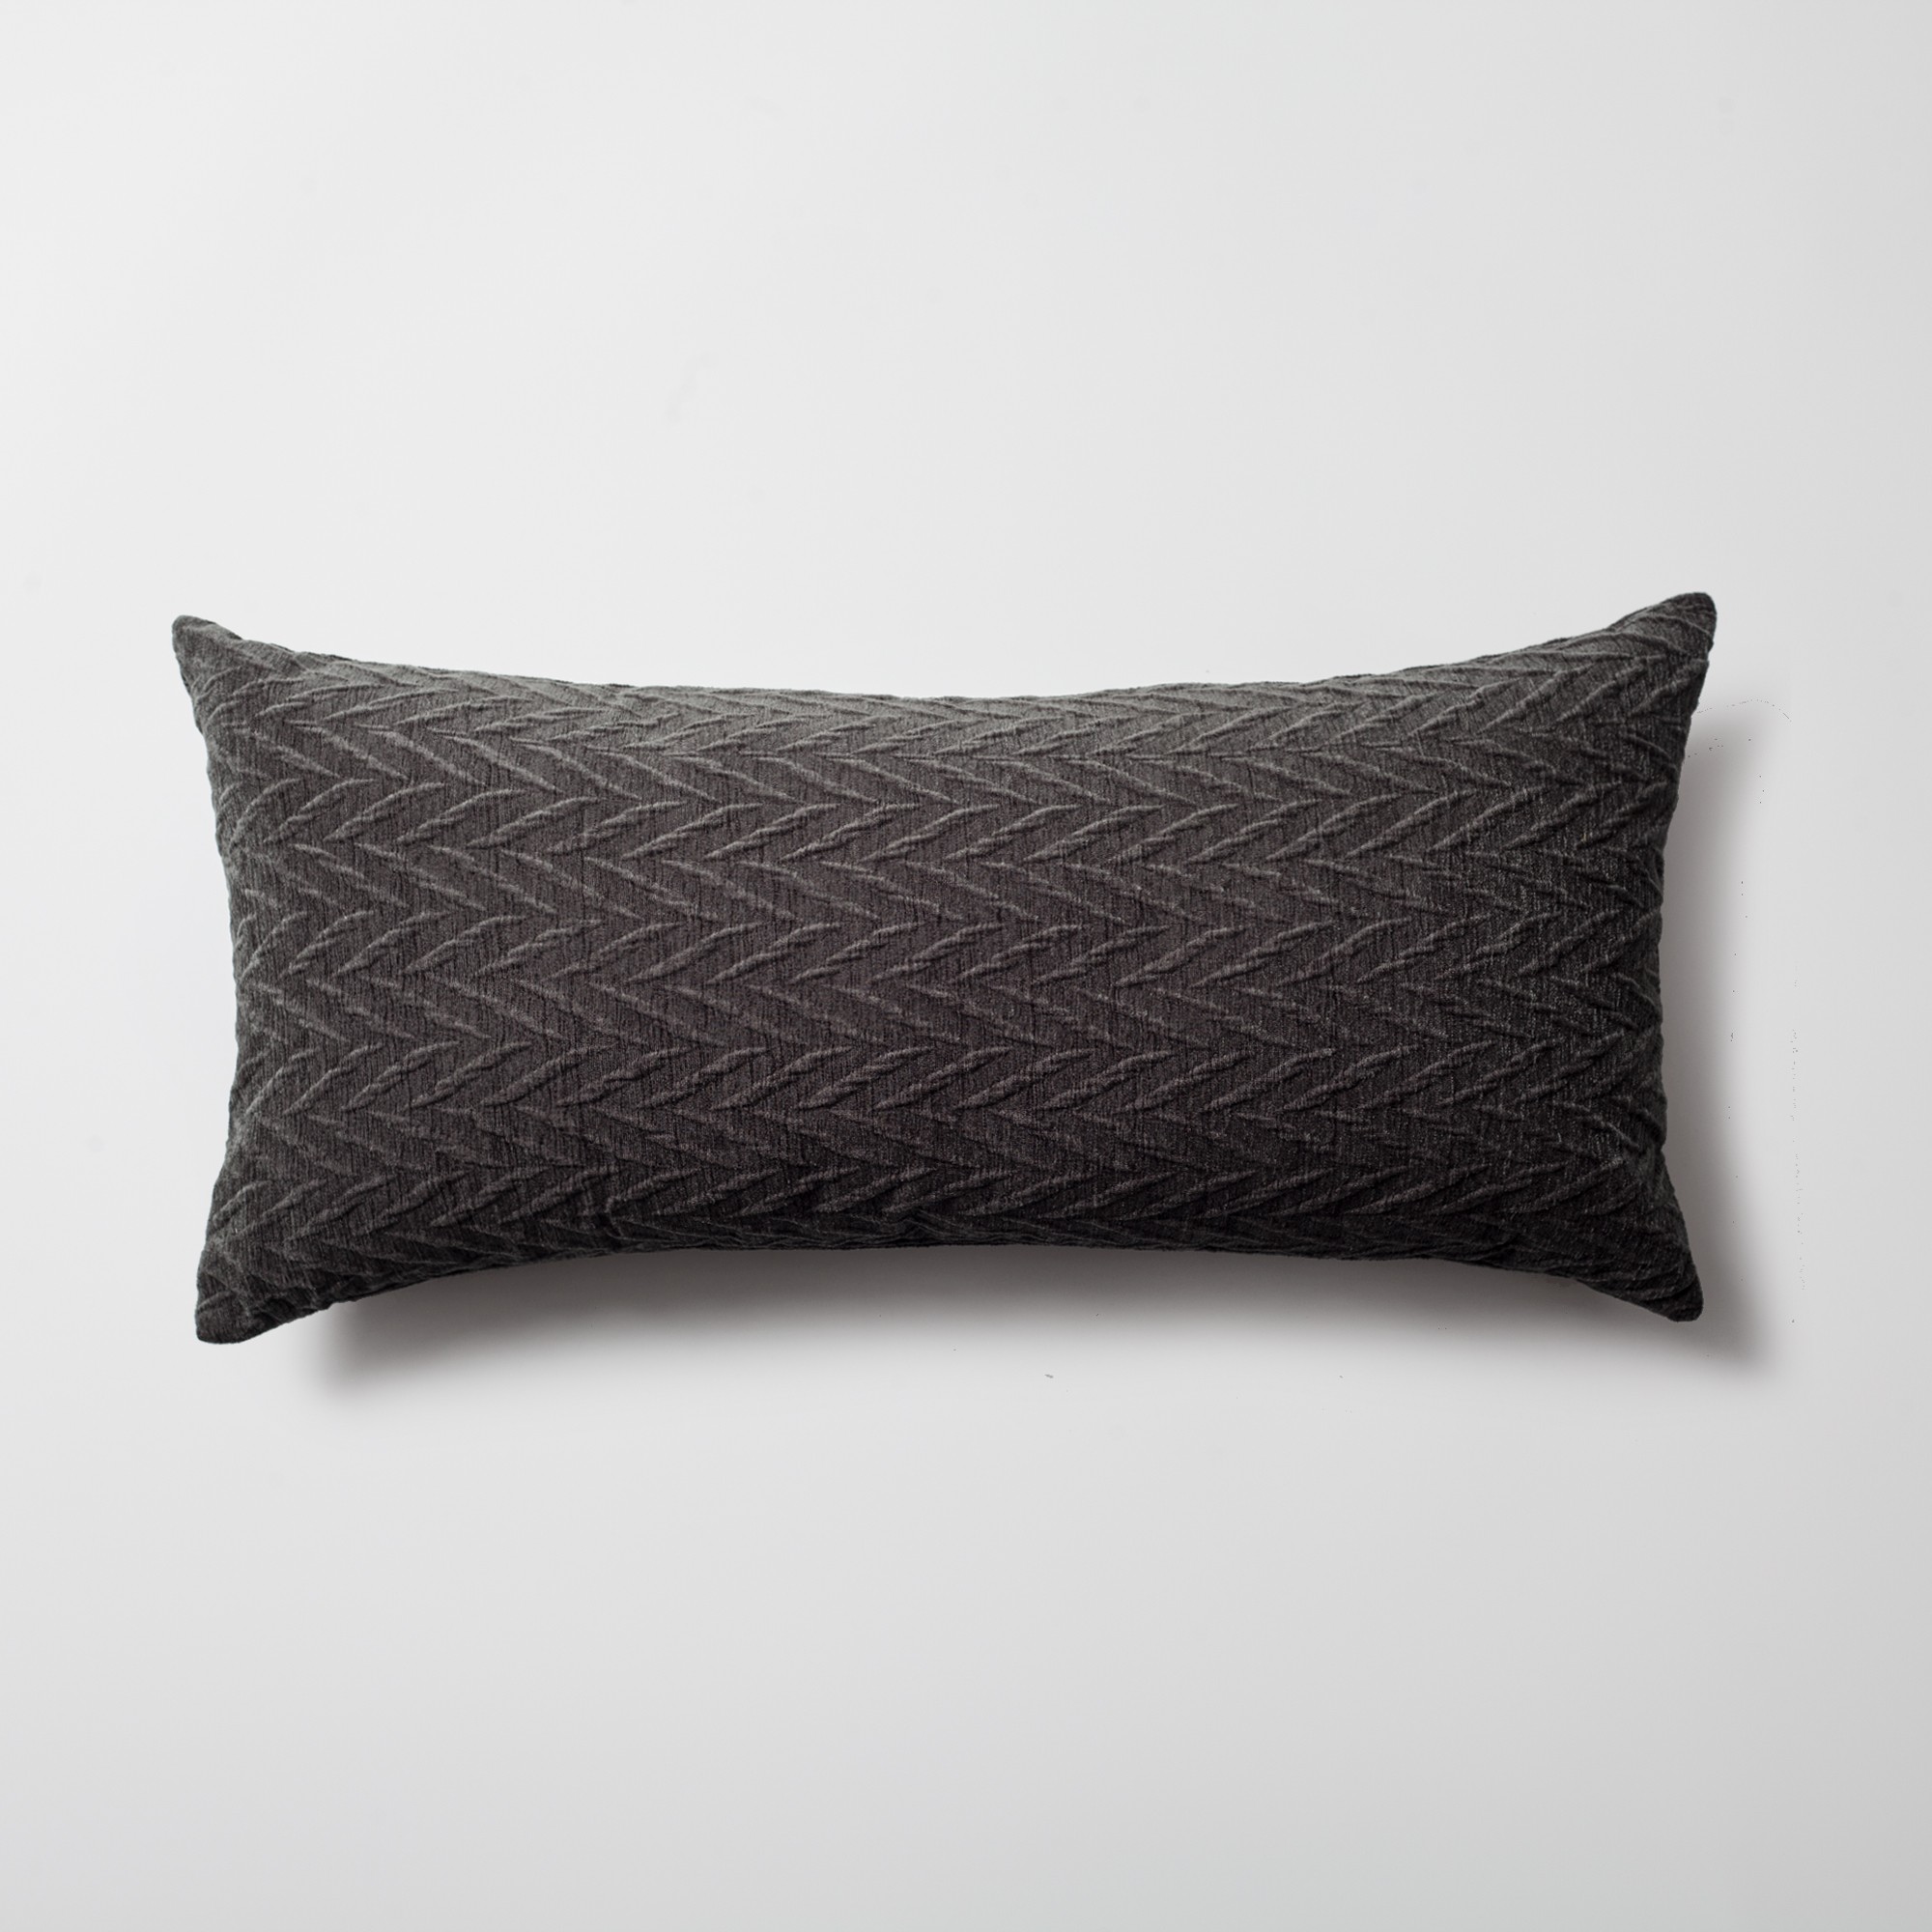 "Cello" - Embossed Pattern Cushion 14x28 Inch - Gray (Cover Only)